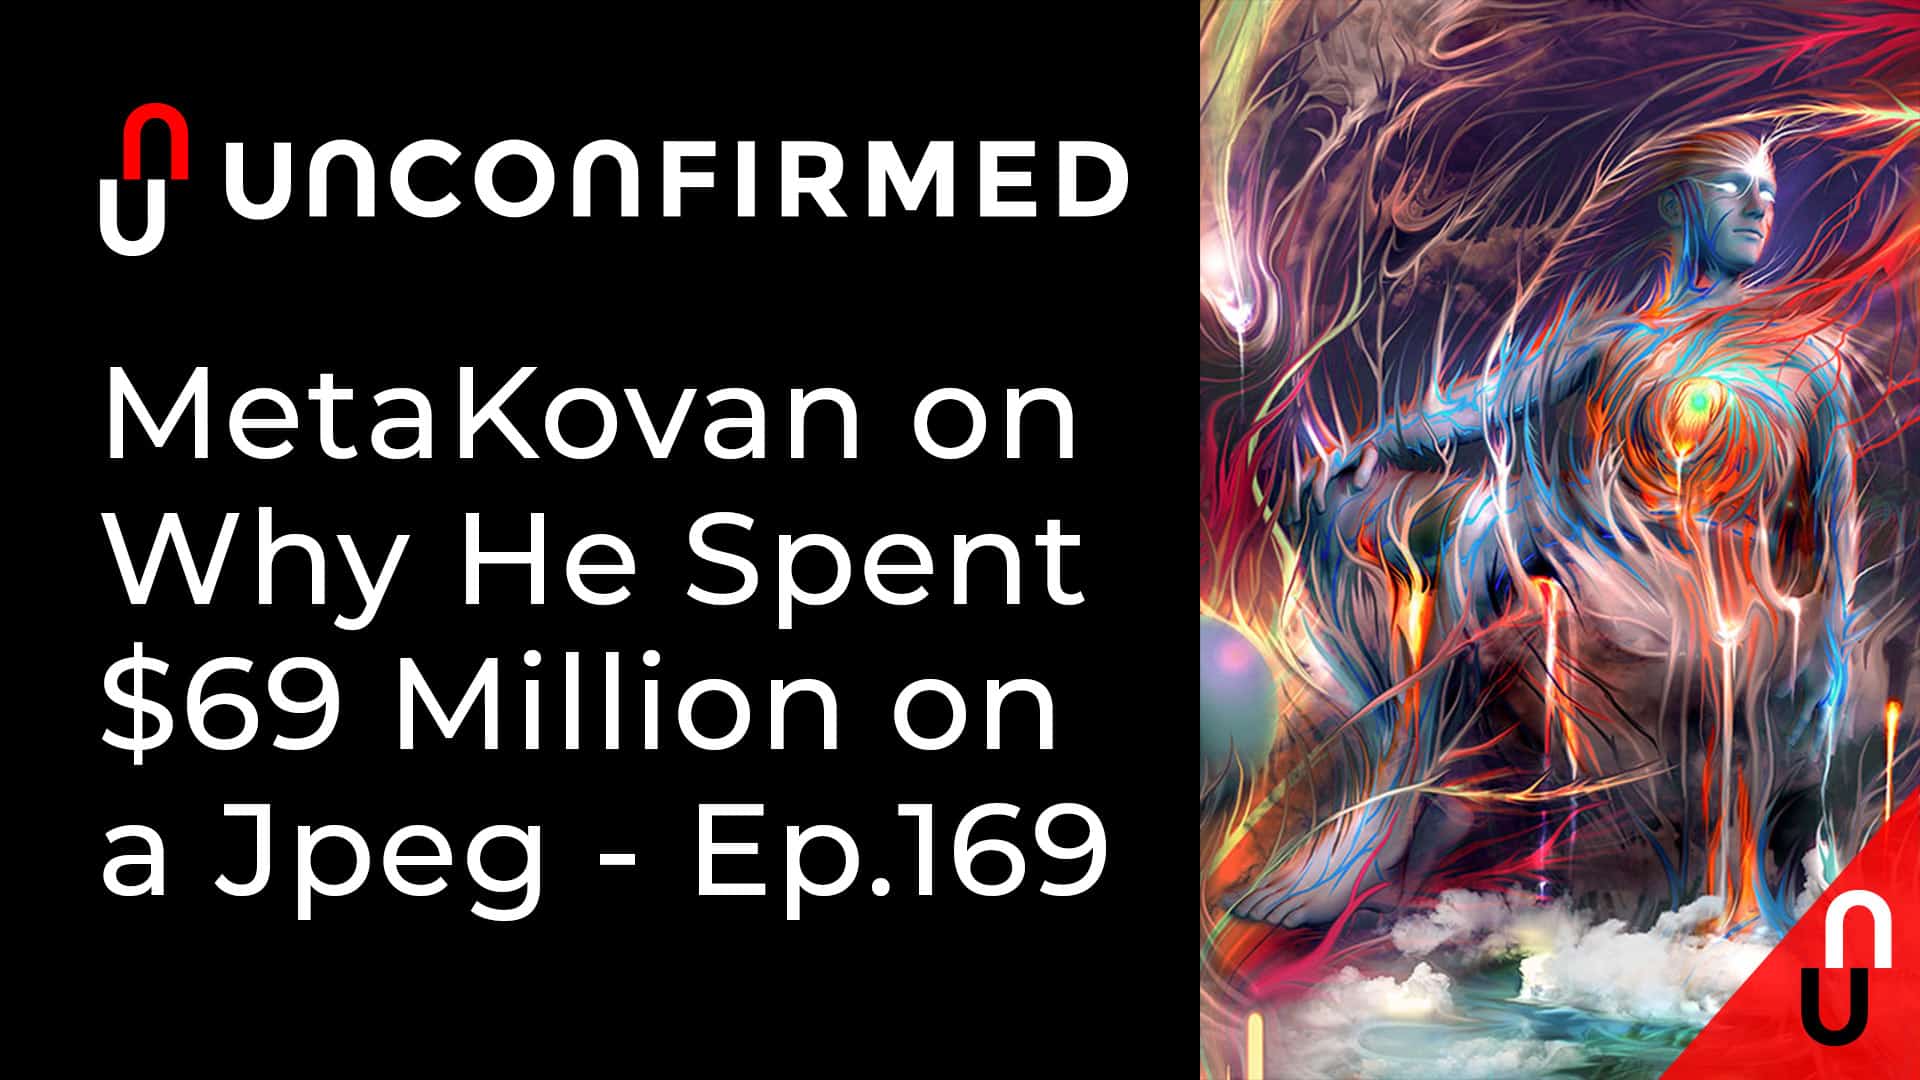 Unconfirmed - Ep.169 - MetaKovan on Why He Spent $69 Million on a Jpeg